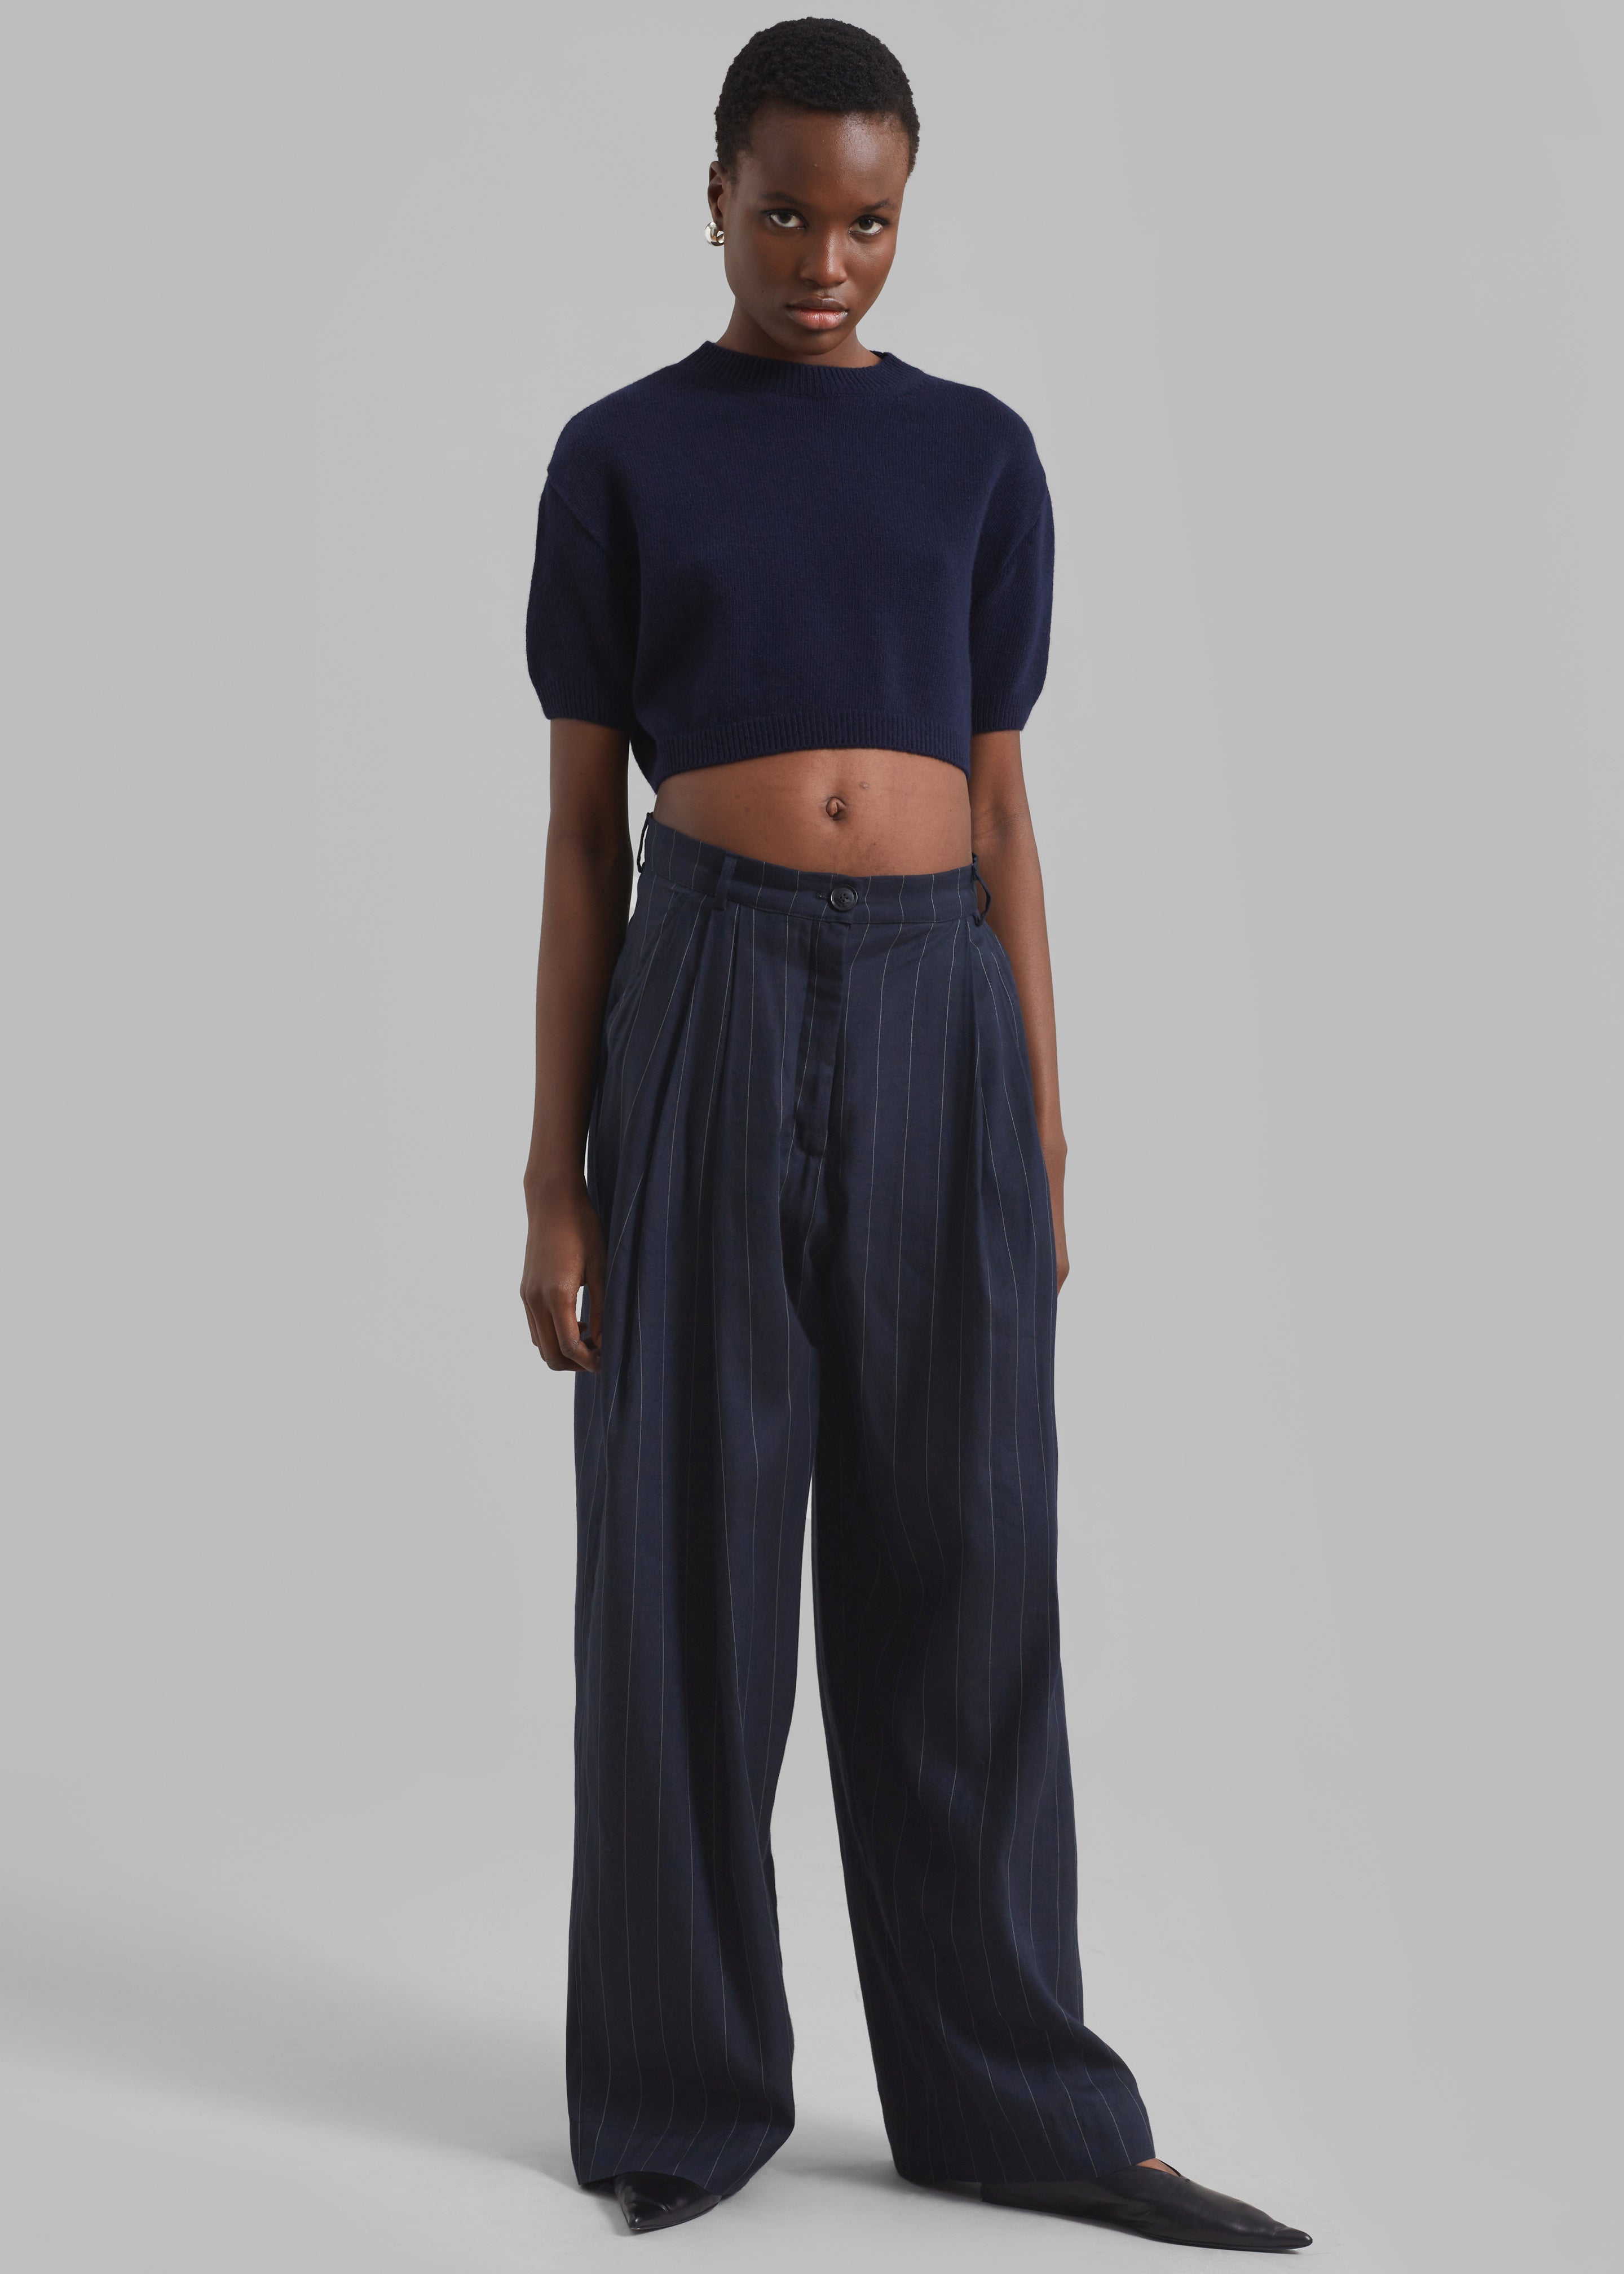 Piper Pleated Trousers - Navy/Beige Pinstripe - 4